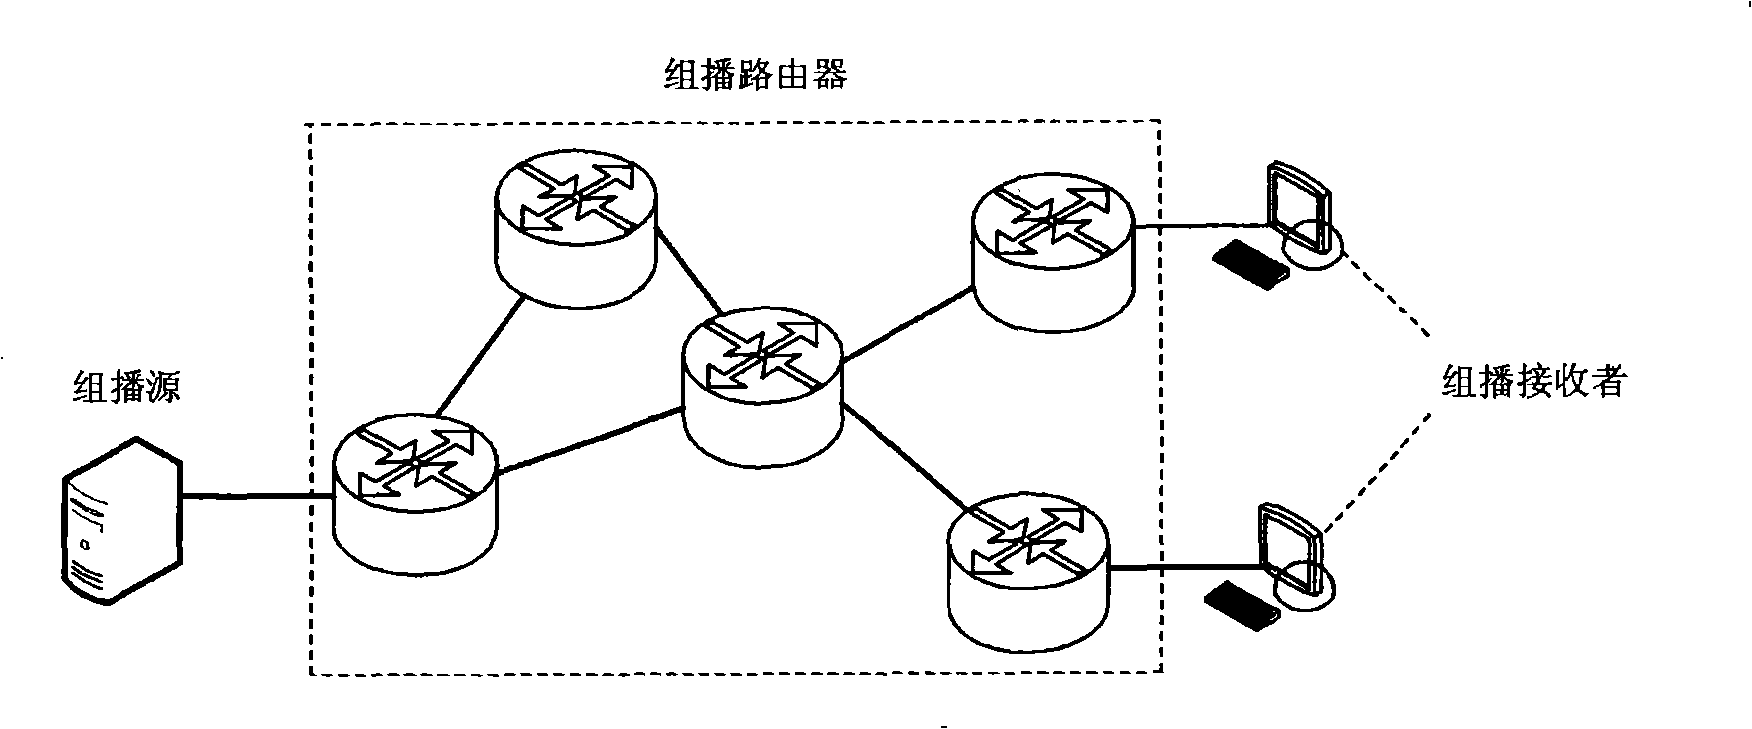 Multicast access equipment and method